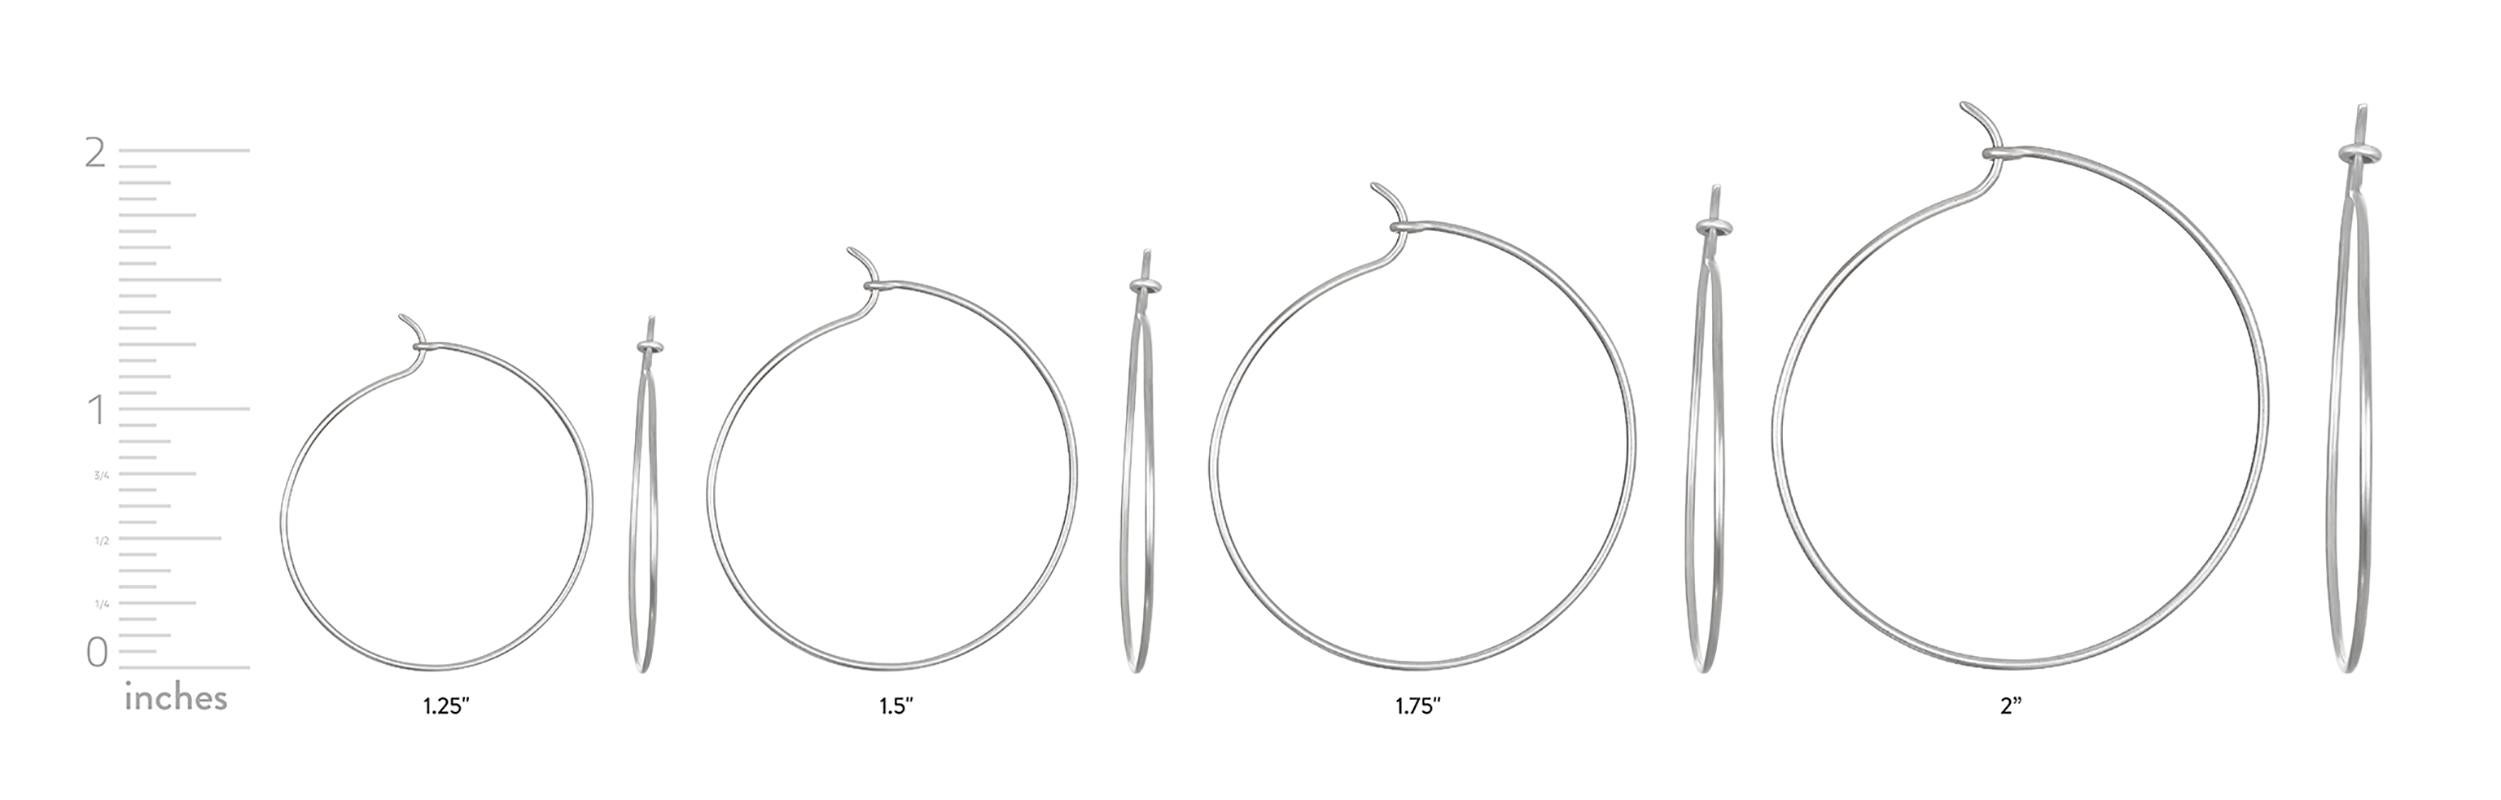 Faye Kim's Signature Platinum handmade wire hoops are a must-have for every jewelry wardrobe. Casual, chic and wearable every day, the hoops give endless opportunities to change your look with different drops, sold separately.

Hoops 1.25